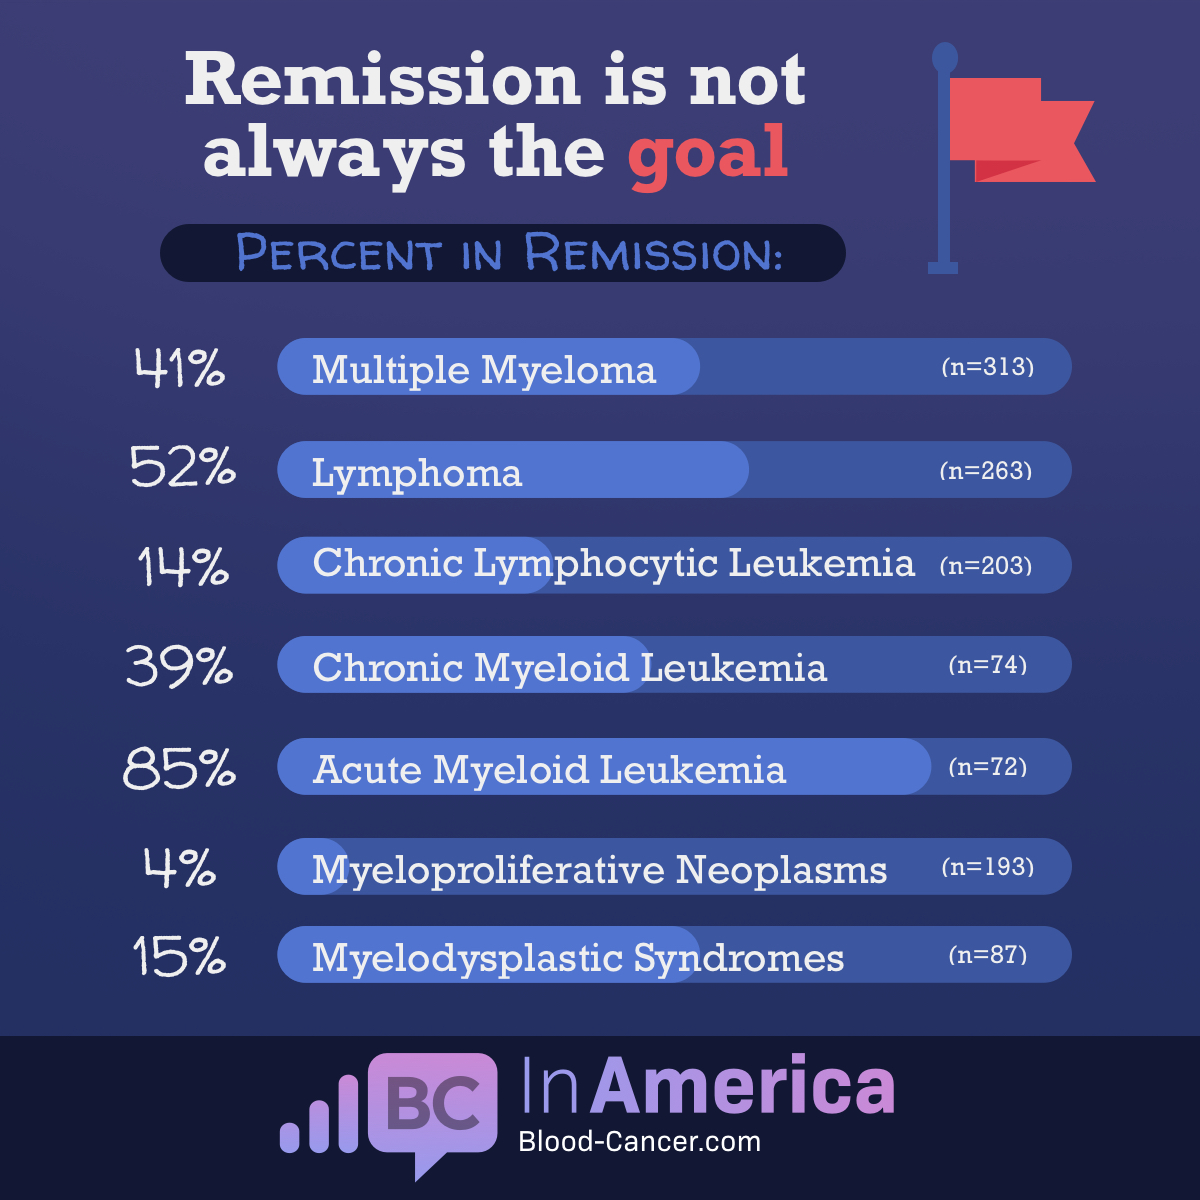 Remission is not always the goal